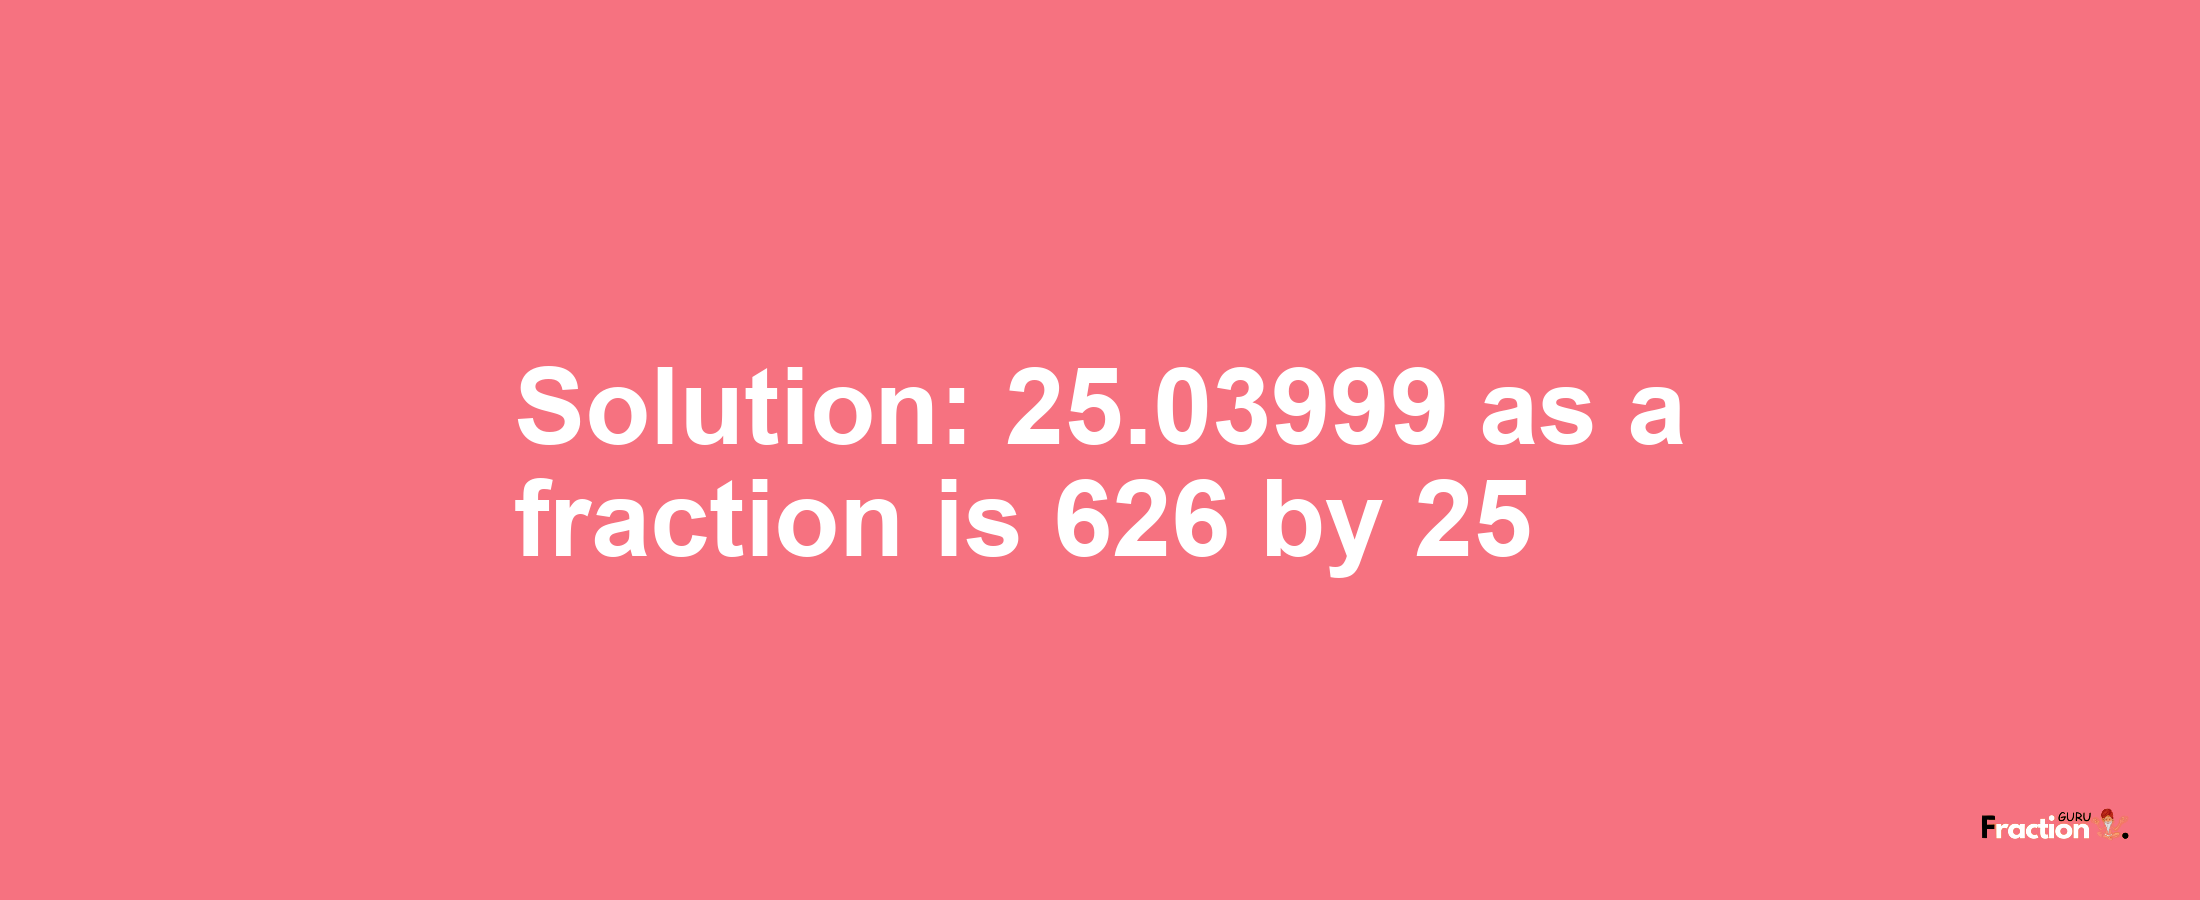 Solution:25.03999 as a fraction is 626/25